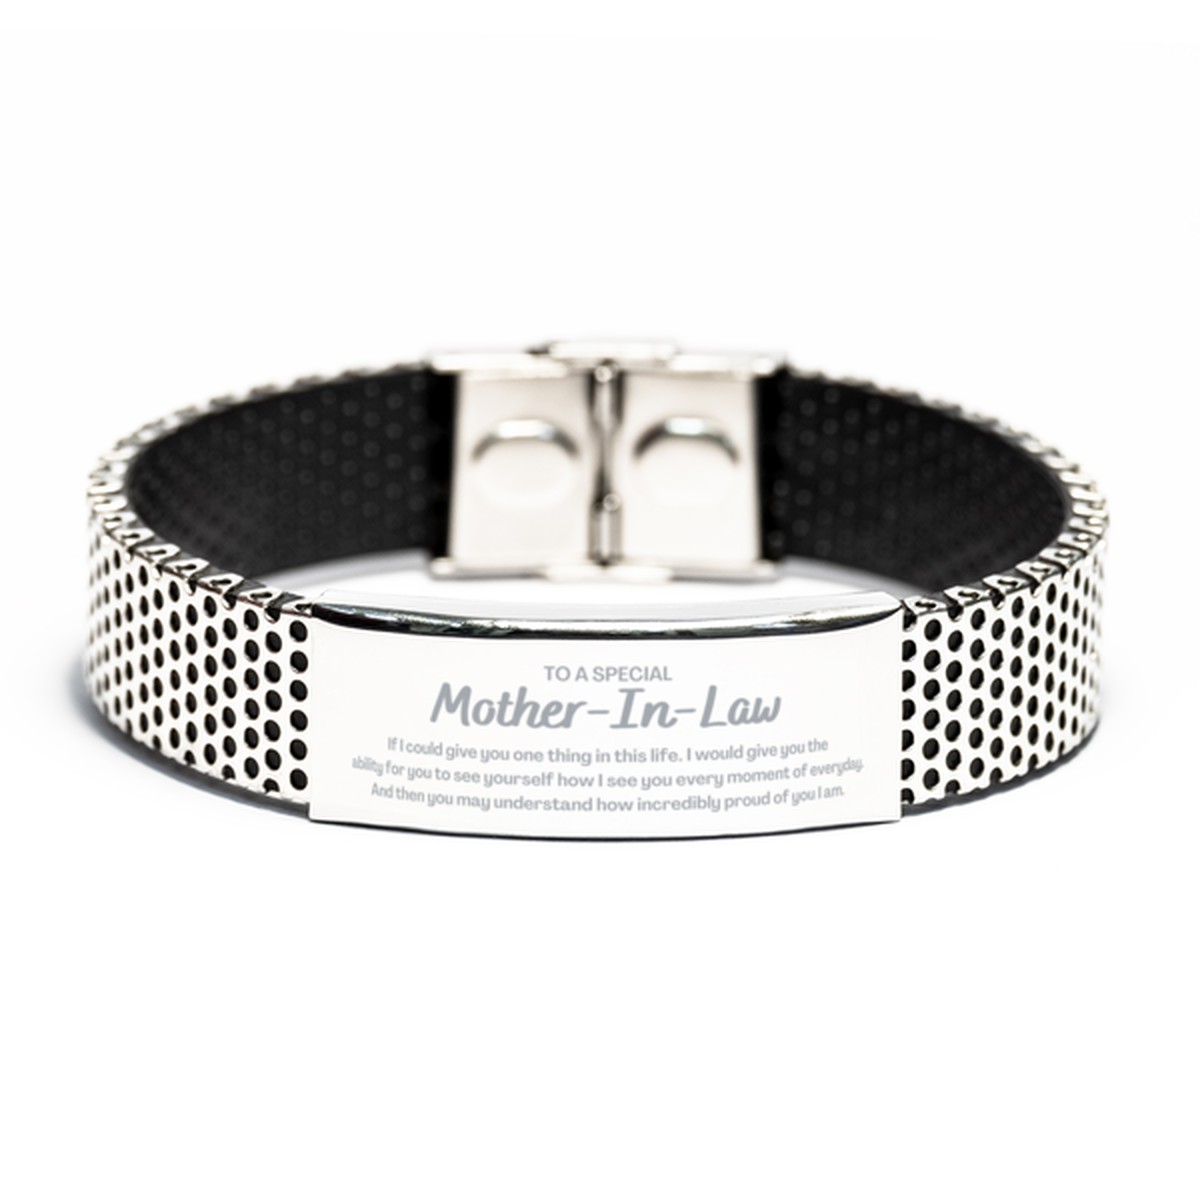 To My Mother-In-Law Stainless Steel Bracelet, Gifts For Mother-In-Law Engraved, Inspirational Gifts for Christmas Birthday, Epic Gifts for Mother-In-Law To A Special Mother-In-Law how incredibly proud of you I am